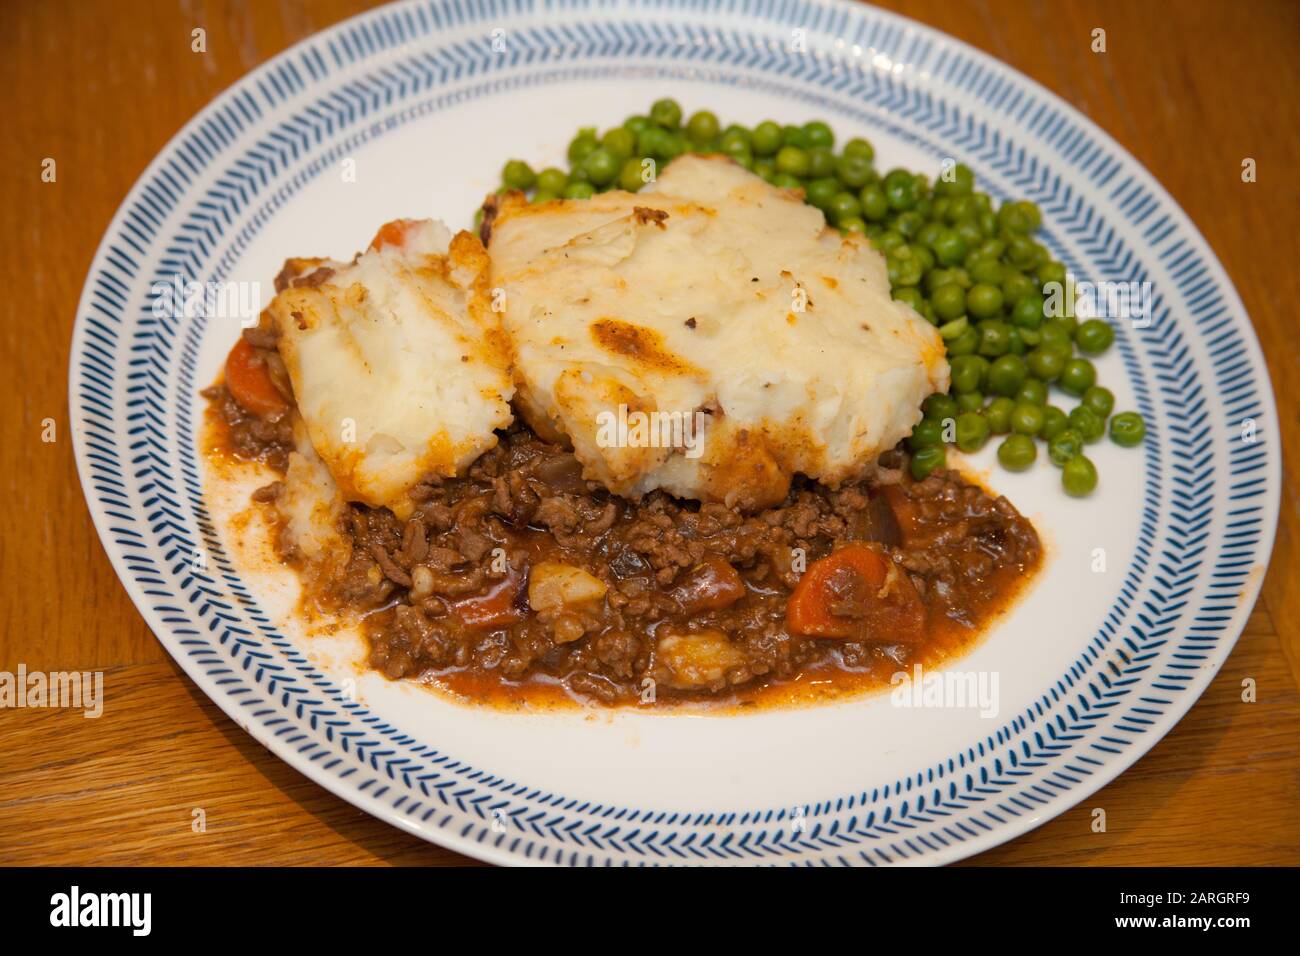 Cottage pie with peas on a plate Stock Photo